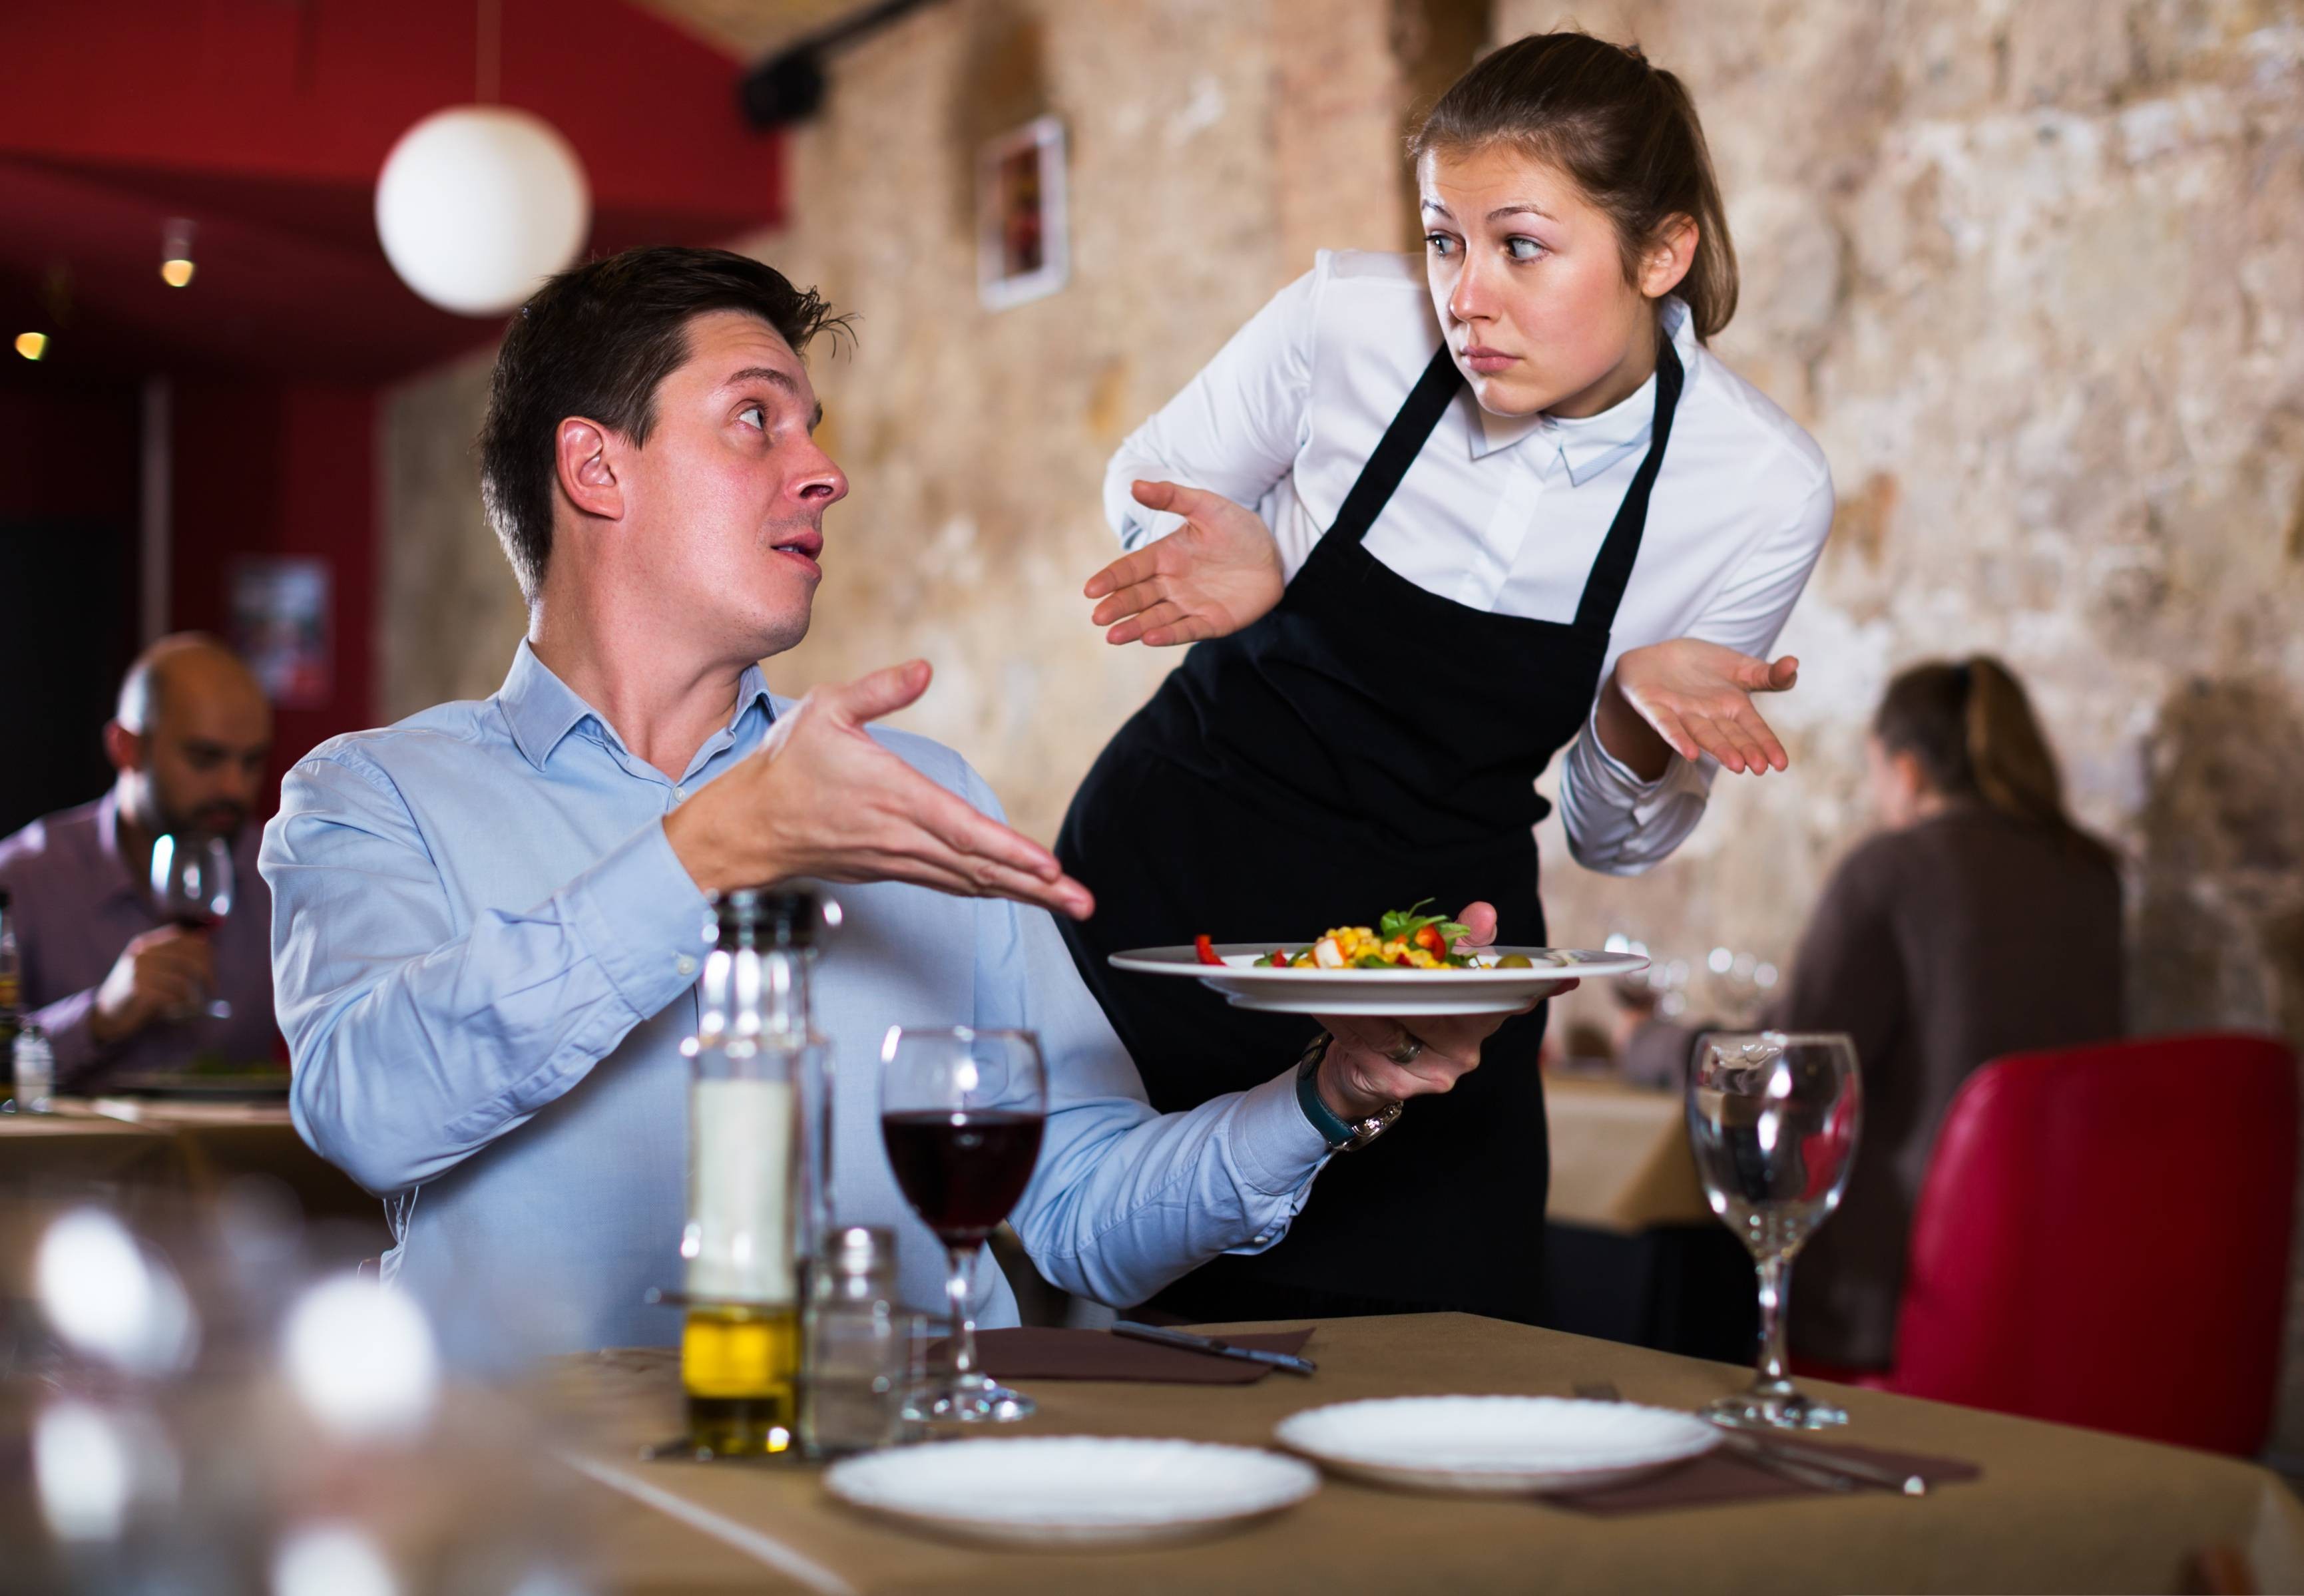 Current Issues In the Restaurant Industry And Their Solutions